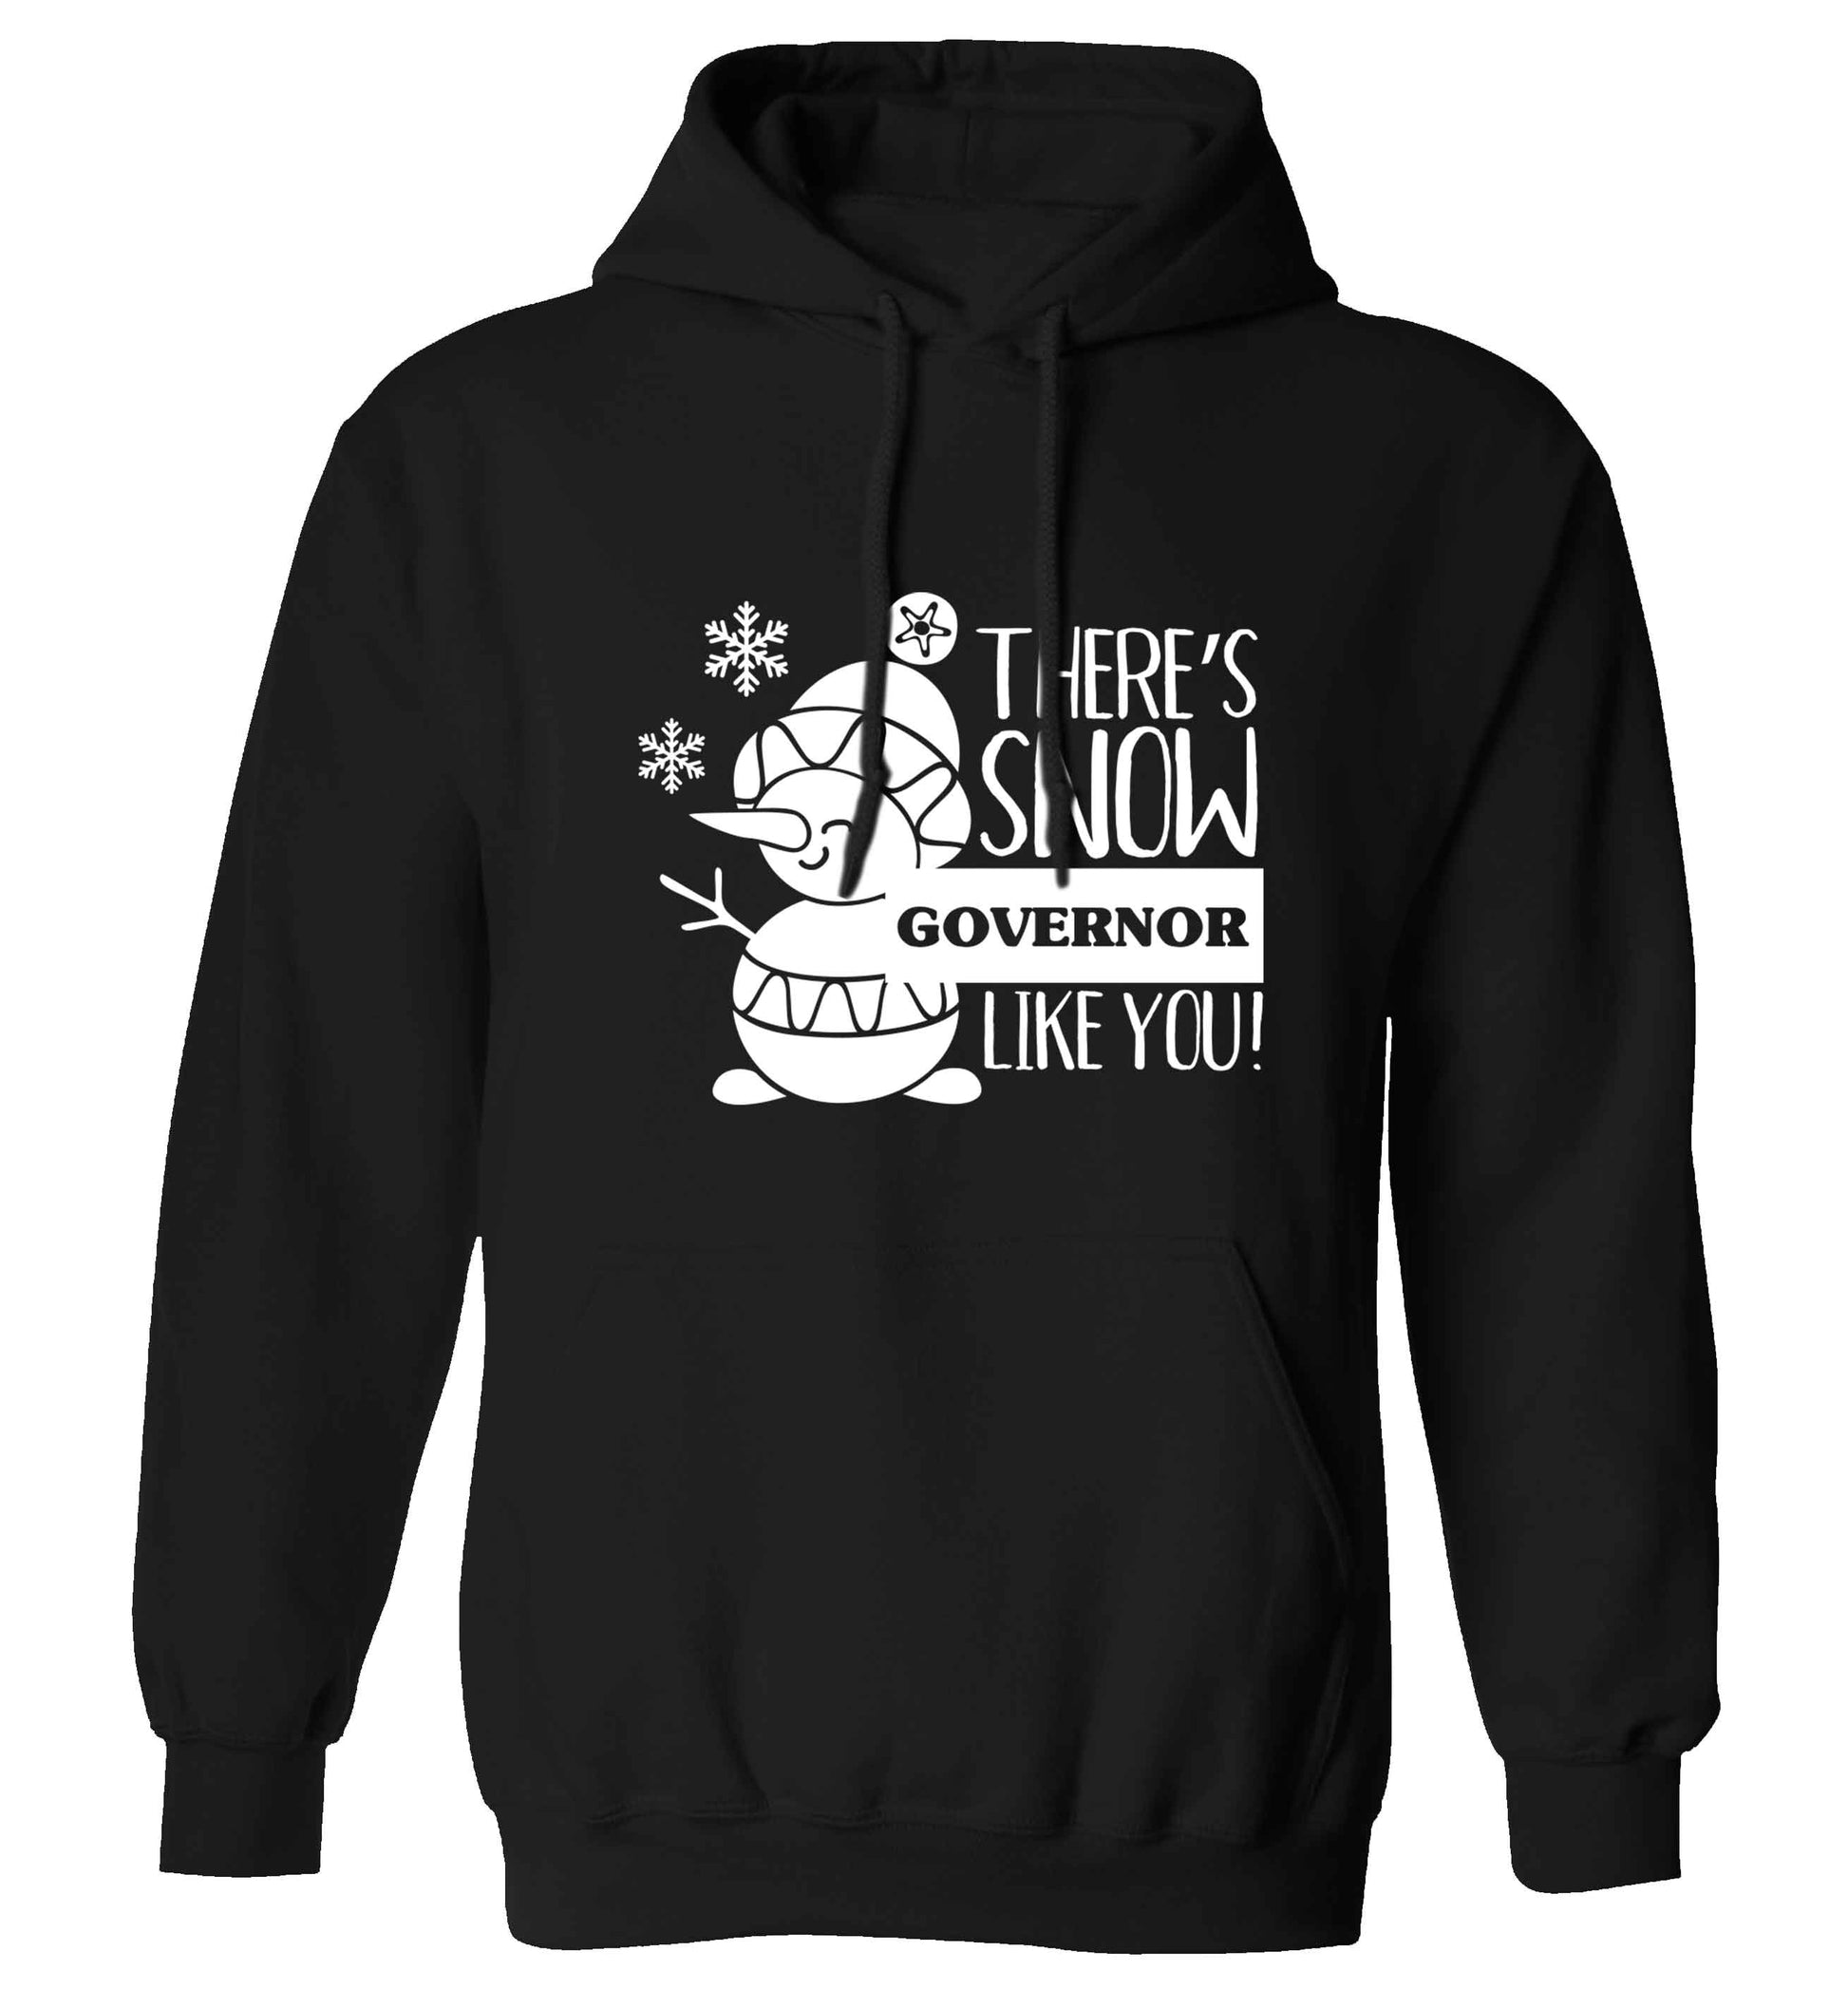 There's snow governor like you adults unisex black hoodie 2XL